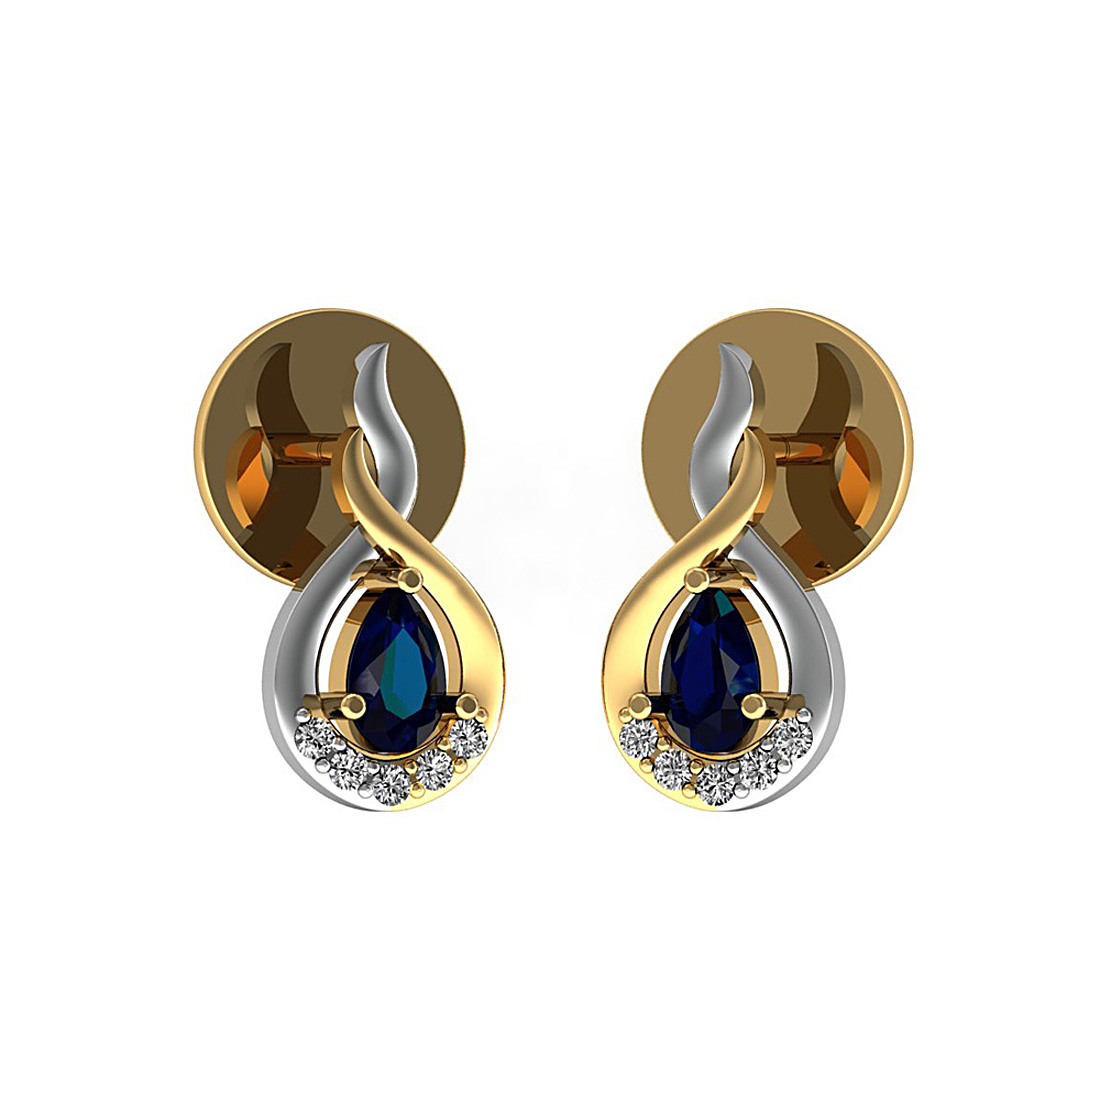 Natural diamond & sapphire stud earrings made in 18k solid gold